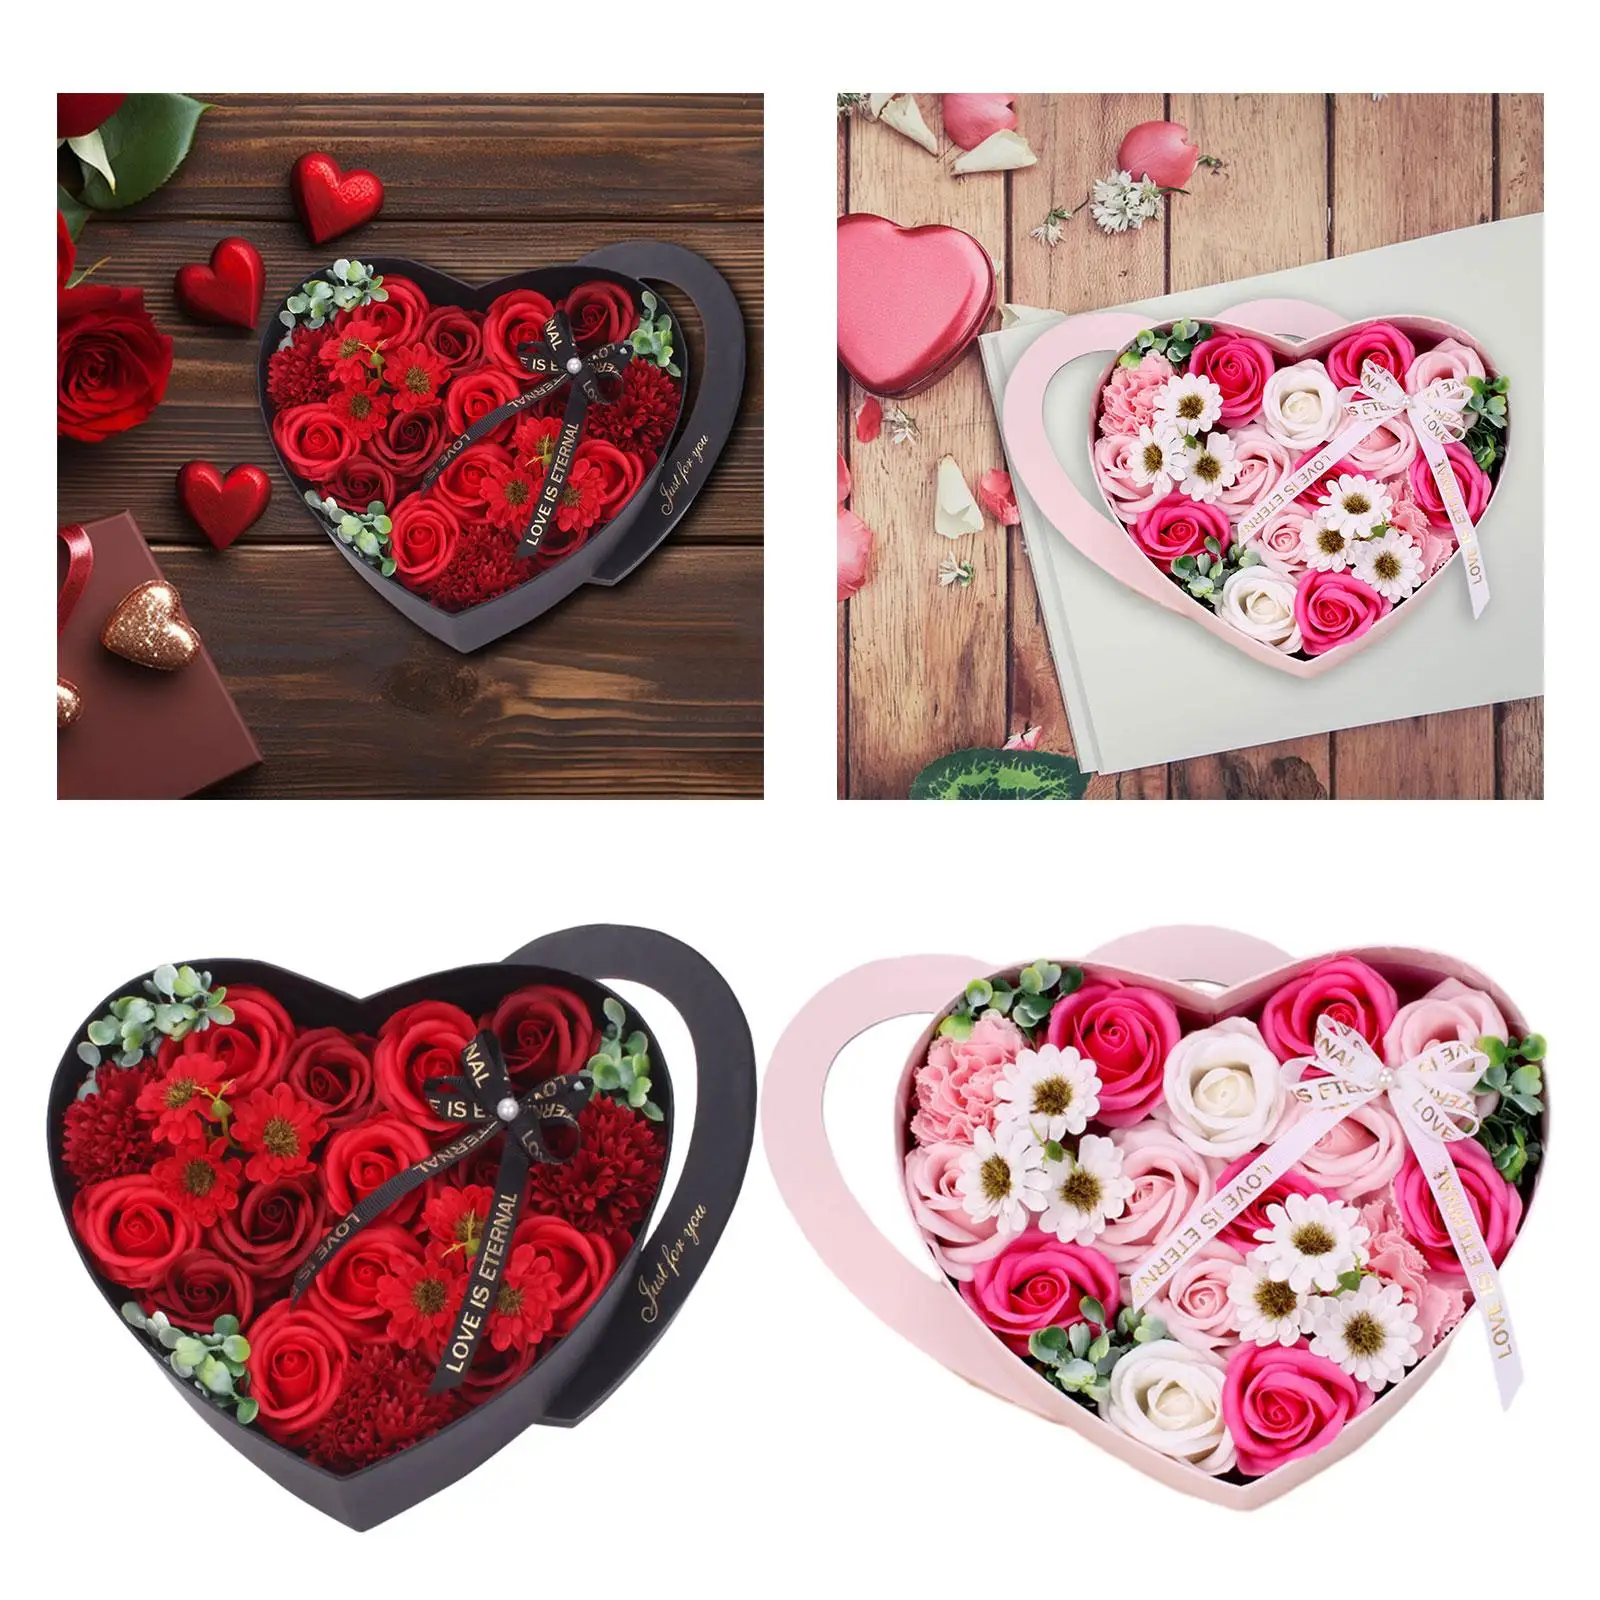 Preserved Flowers Valentines Day Decor Forever Flowers Crafts Artwork Soap Flower with Box for Classroom Garden Home Party Women